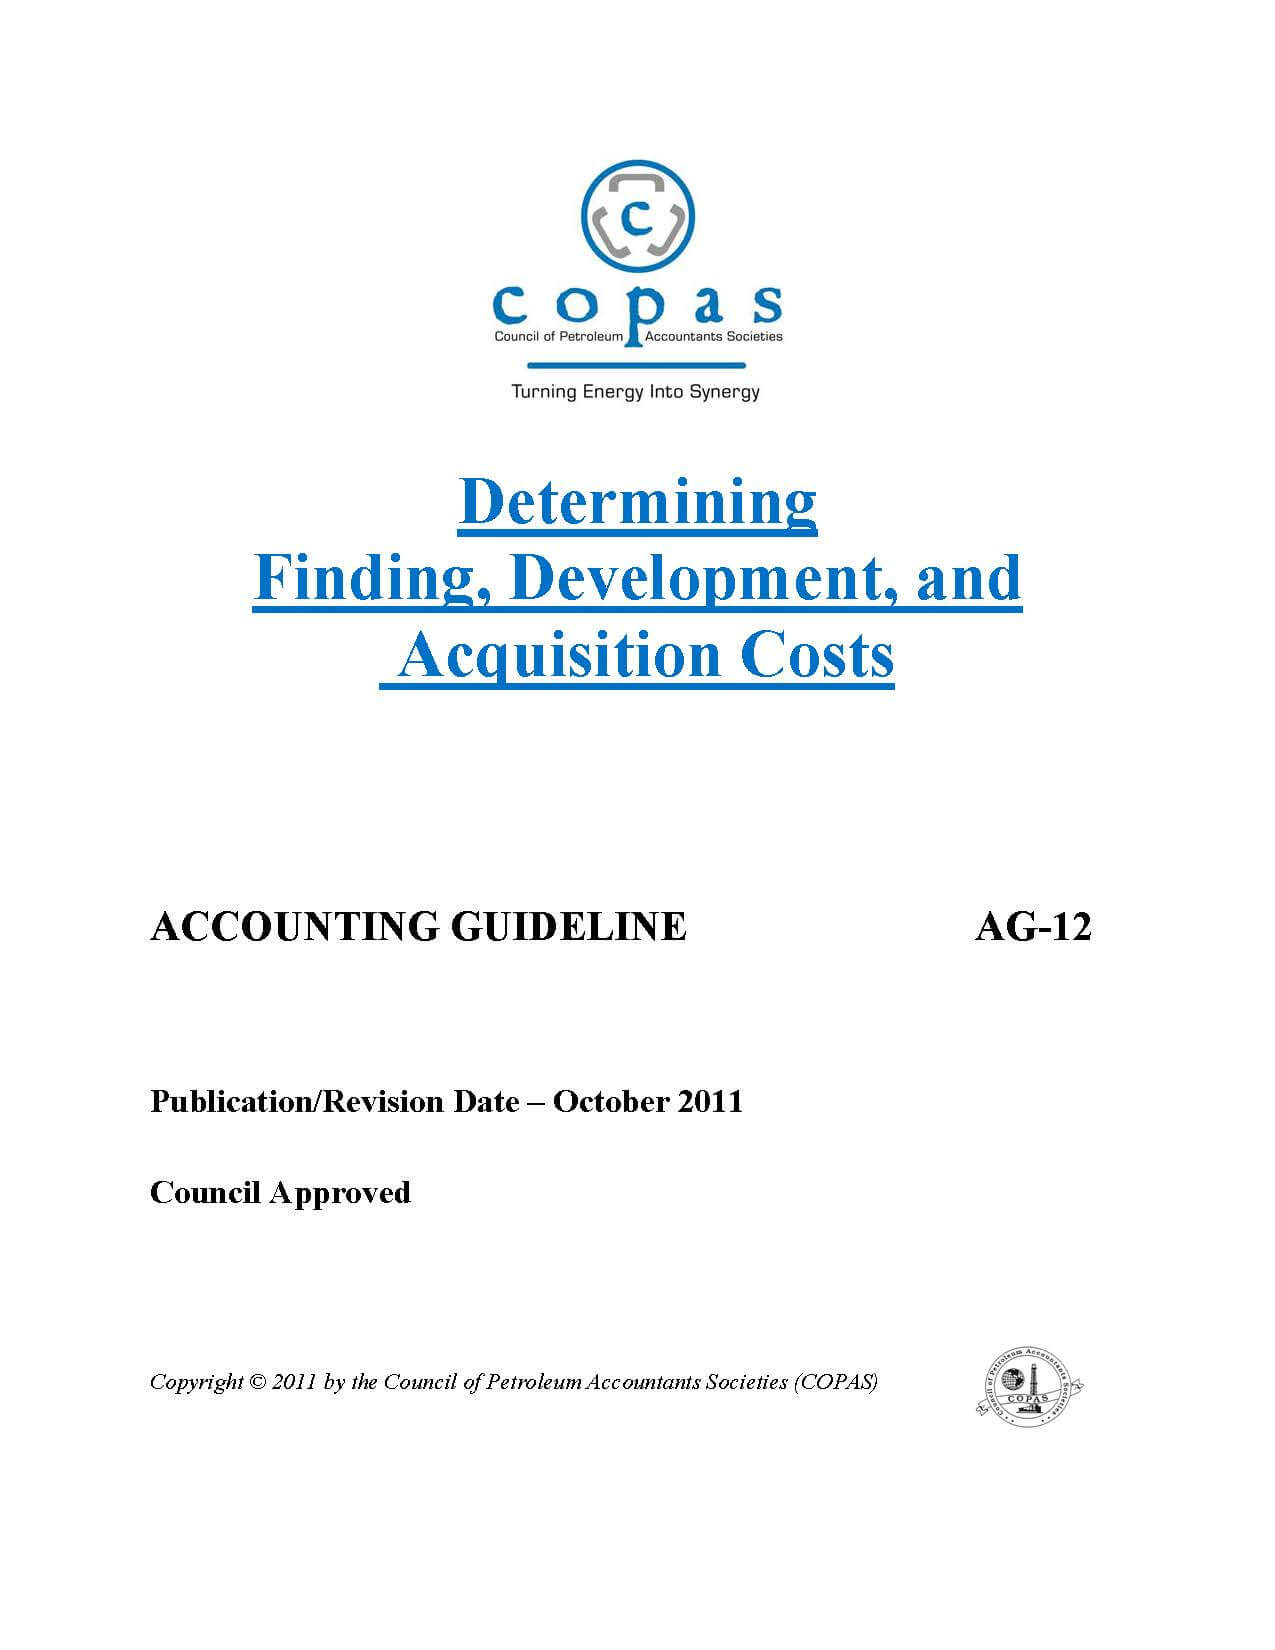 AG-12 Determining Finding, Development, and Acquisition Costs - products AG 12 Determining Finding Development Acquisition Costs - Council of Petroleum Accountants Societies